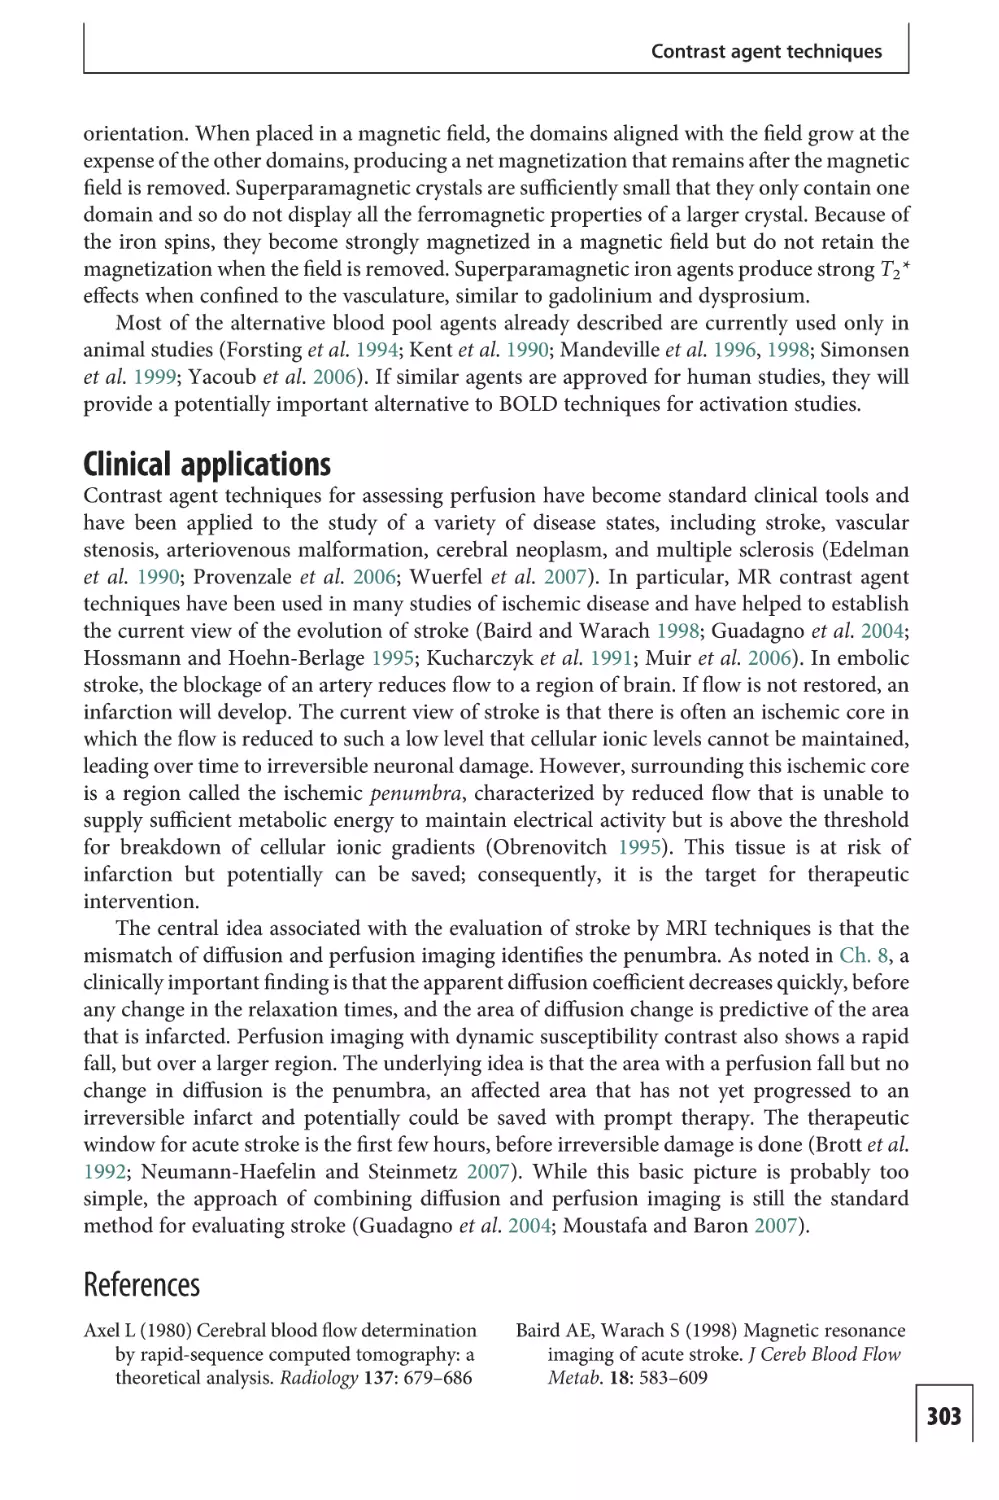 Clinical applications
References